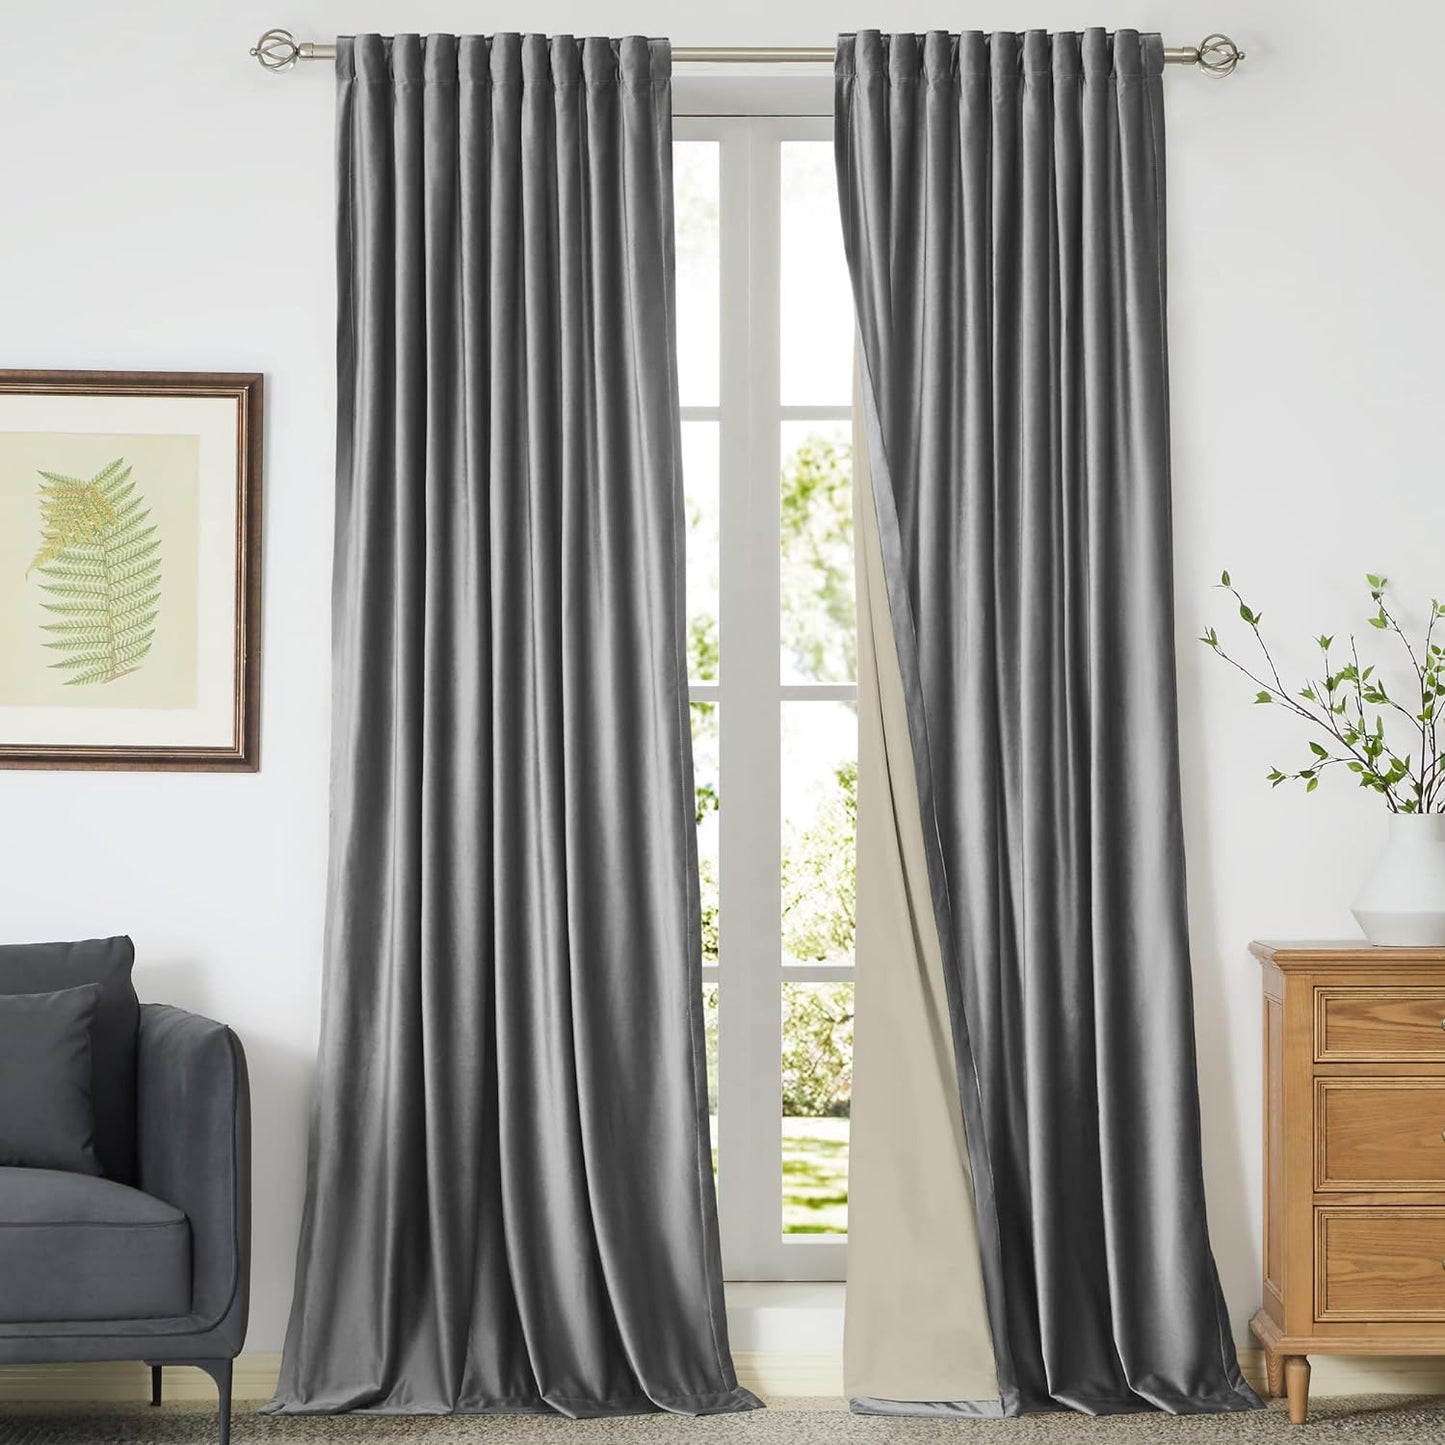 100% Blackout Ivory off White Velvet Curtains 108 Inch Long for Living Room,Set of 2 Panels Liner Rod Pocket Back Tab Thermal Window Drapes Room Darkening Heavy Decorative Curtains for Bedroom  PRIMROSE Dark Grey 52X96 Inches 